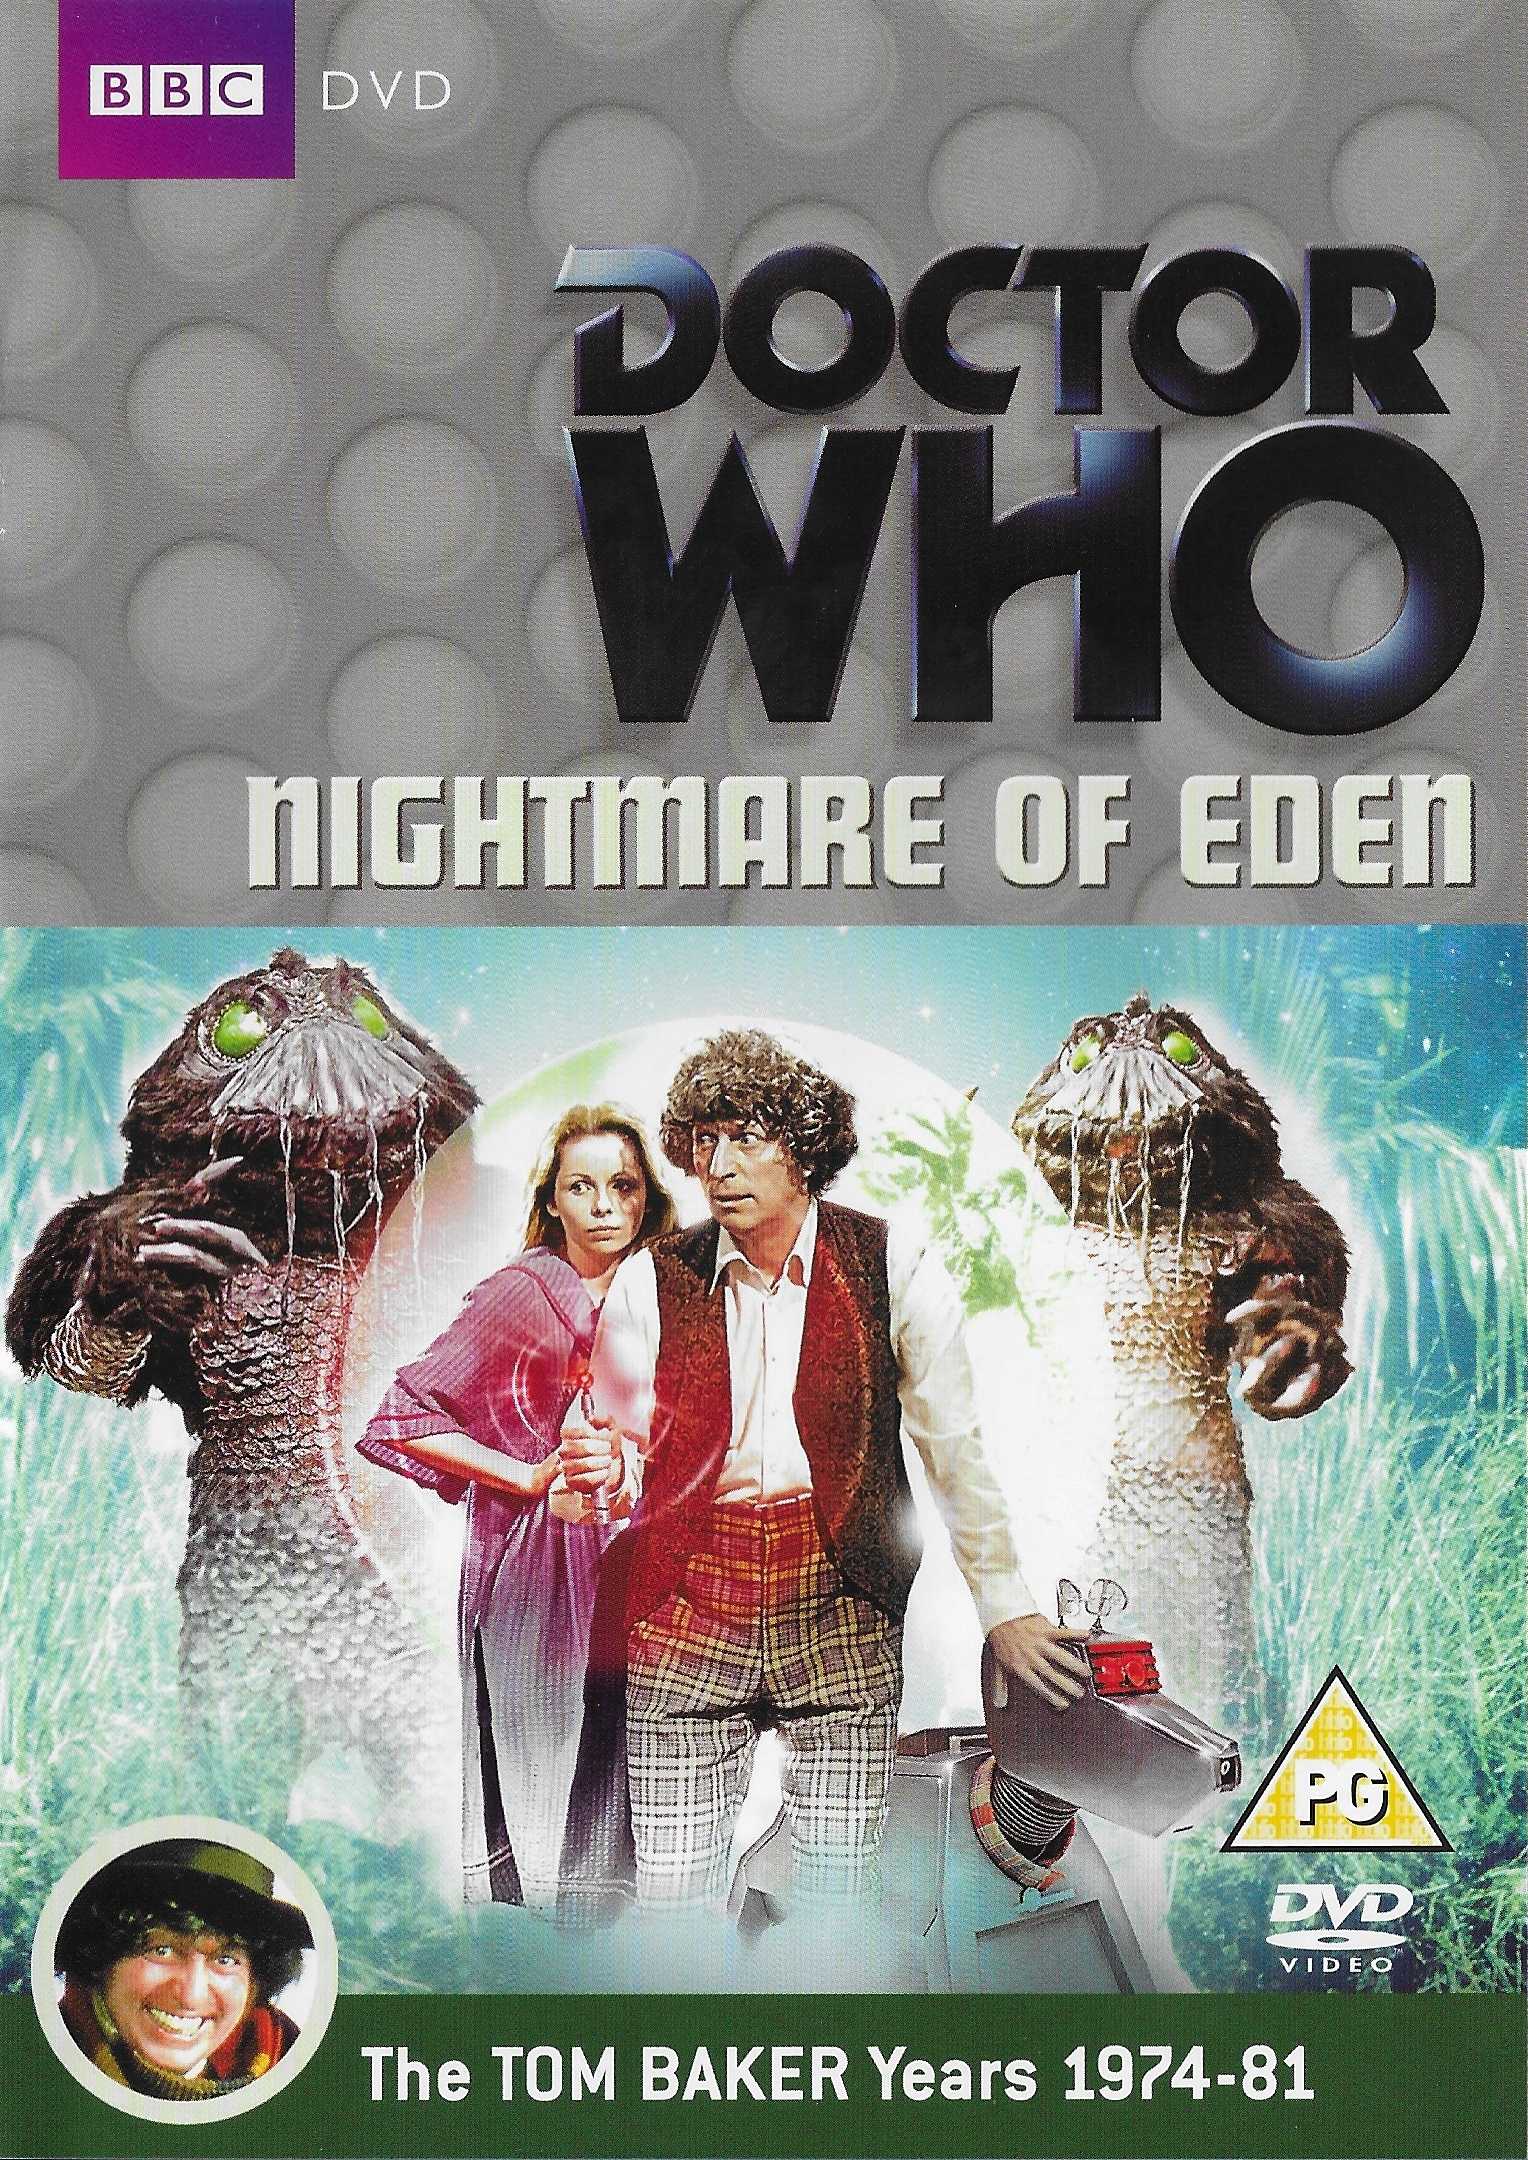 Picture of BBCDVD 3378 Doctor Who - Nightmare of Eden by artist Bob Baker from the BBC dvds - Records and Tapes library